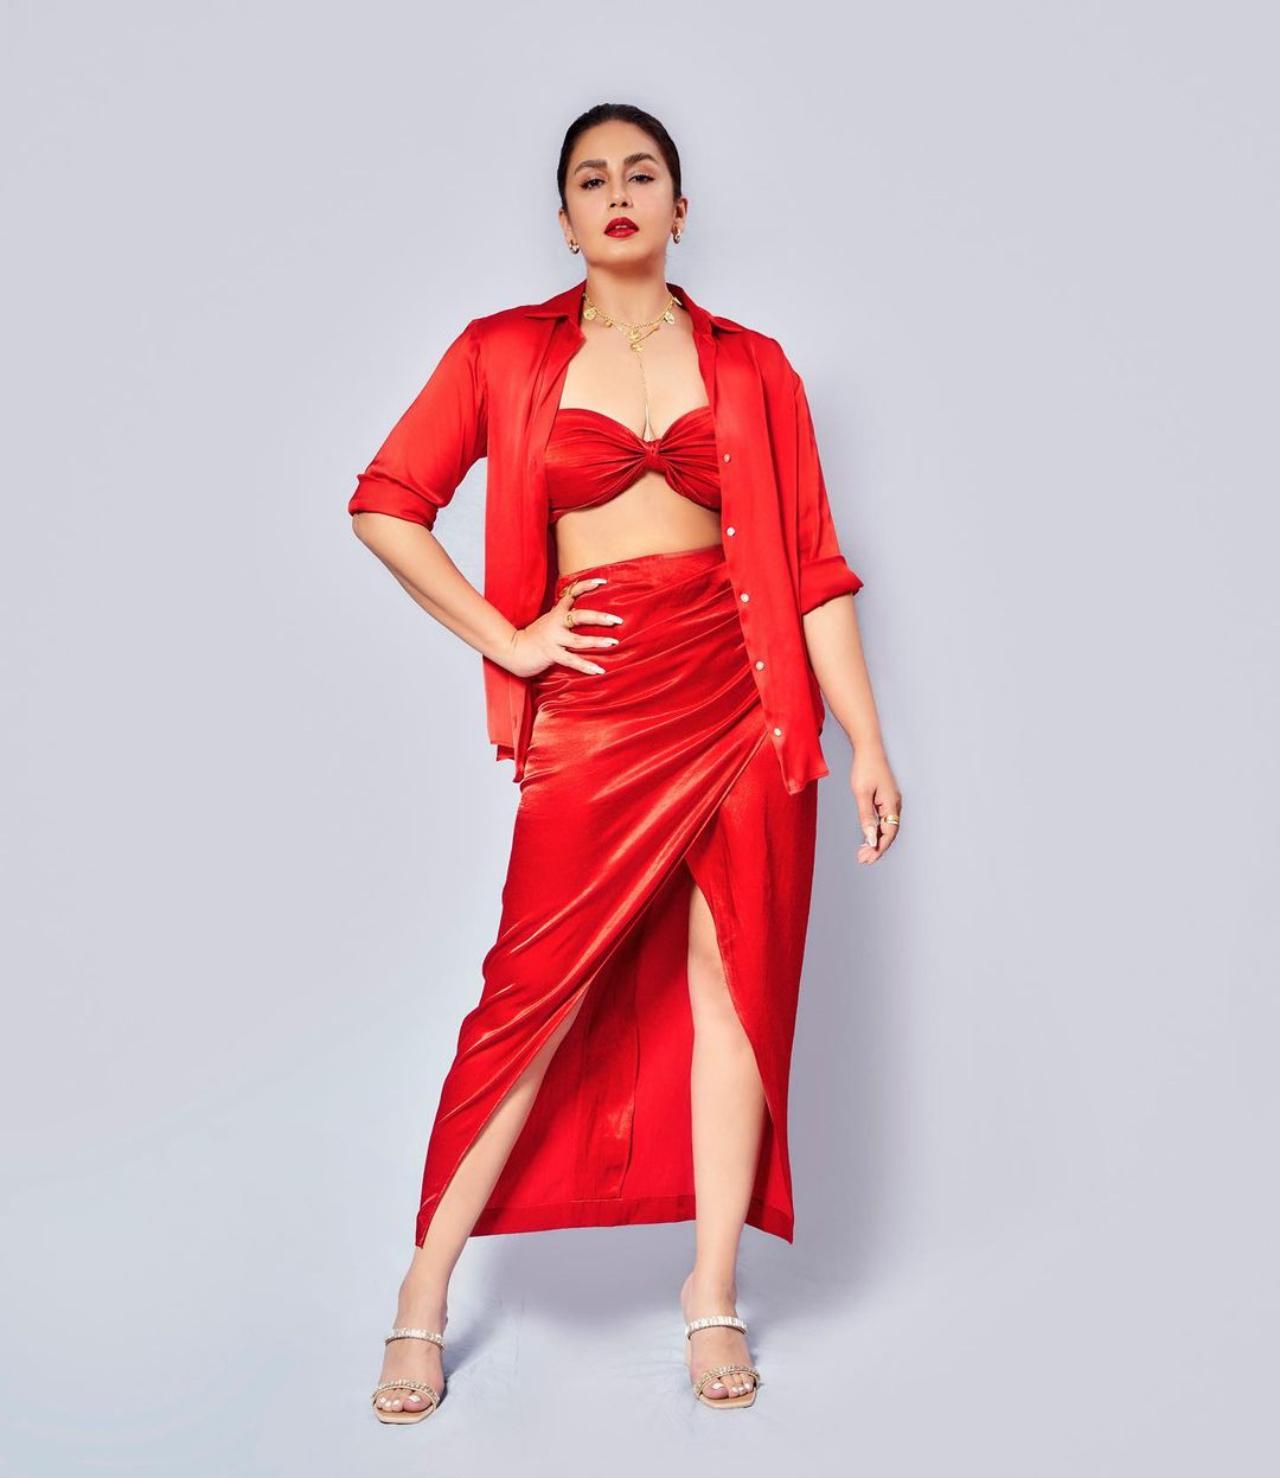 She complimented her look with silver heels and accessorised with multiple finger rings, a pair of statement golden hoops and golden chain. She opted for a natural makeup look to go with her bright outfit. Huma picked a pair of silver heels from Cai's racks to go with her all-red outfit